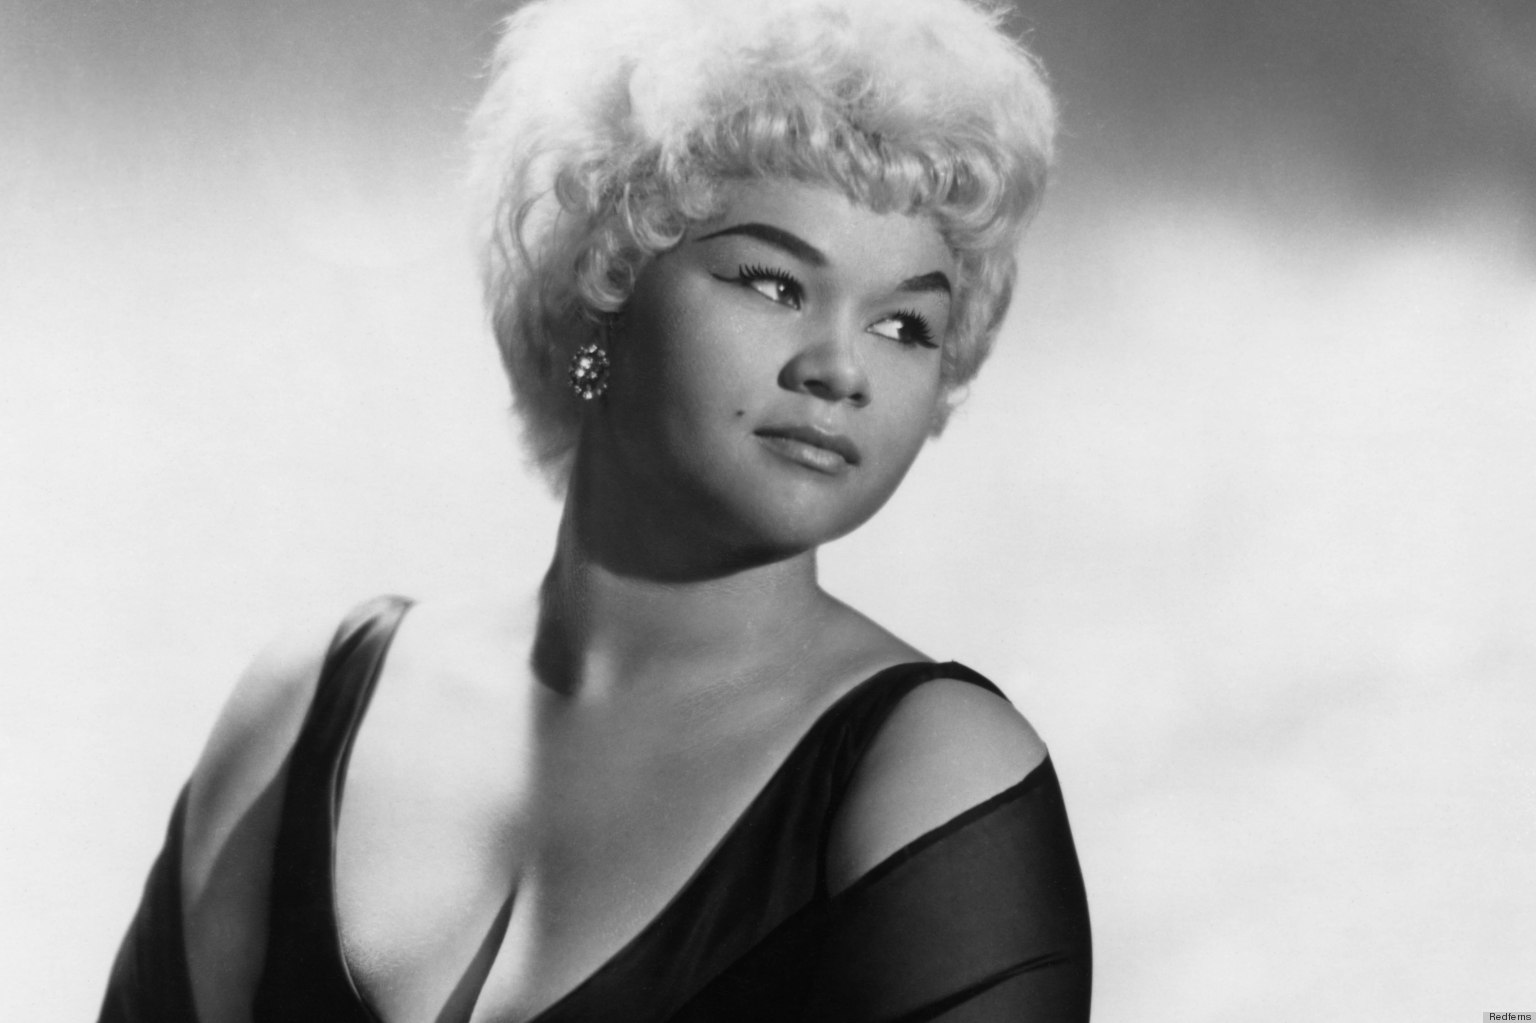 It feels so good to be happy. Etta James
Happy Birthday to the late great 